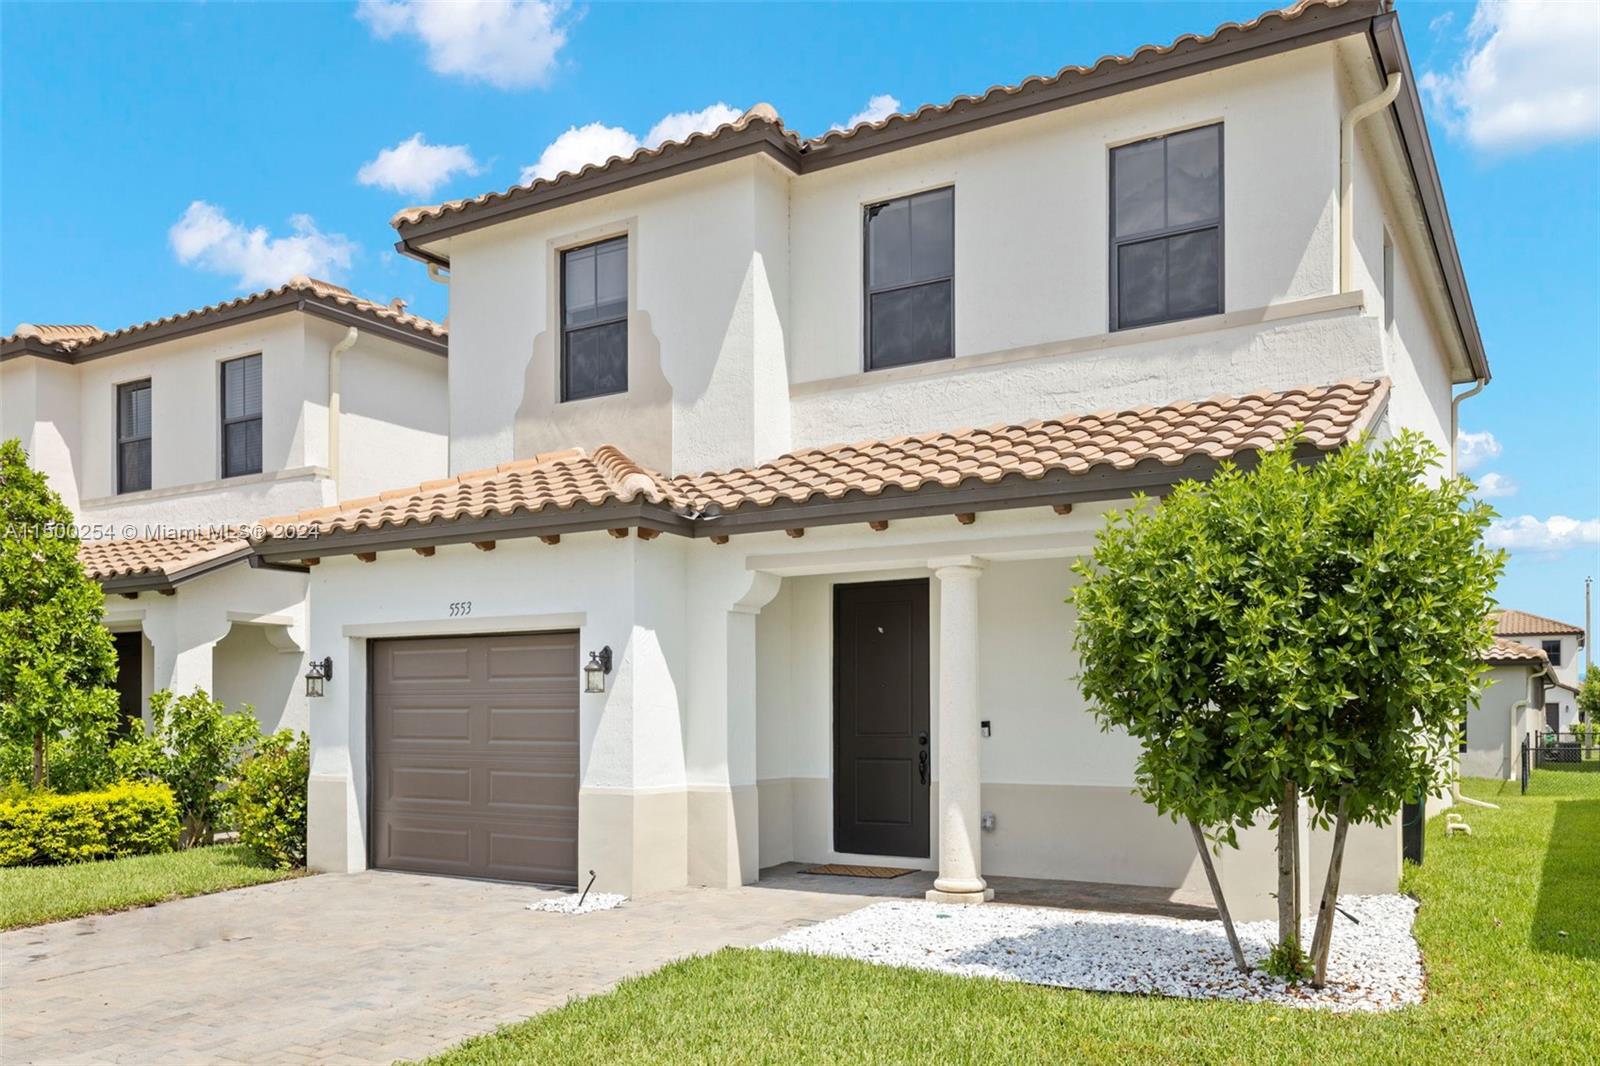 Photo of 5553 Agostino Wy in Ave Maria, FL